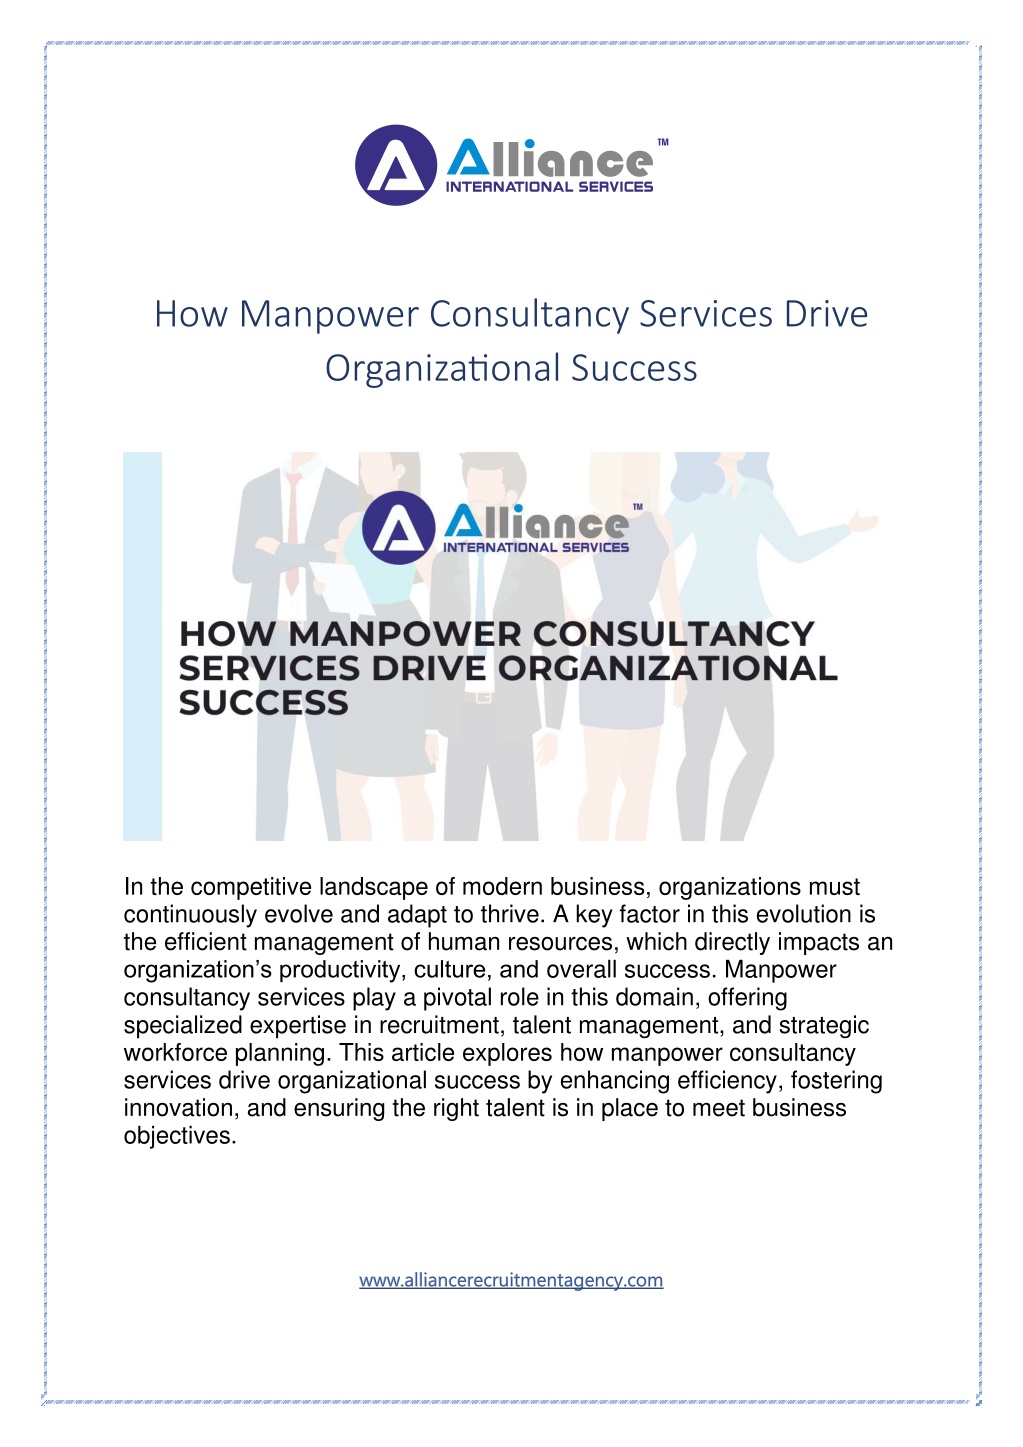 how manpower consultancy services drive l.w